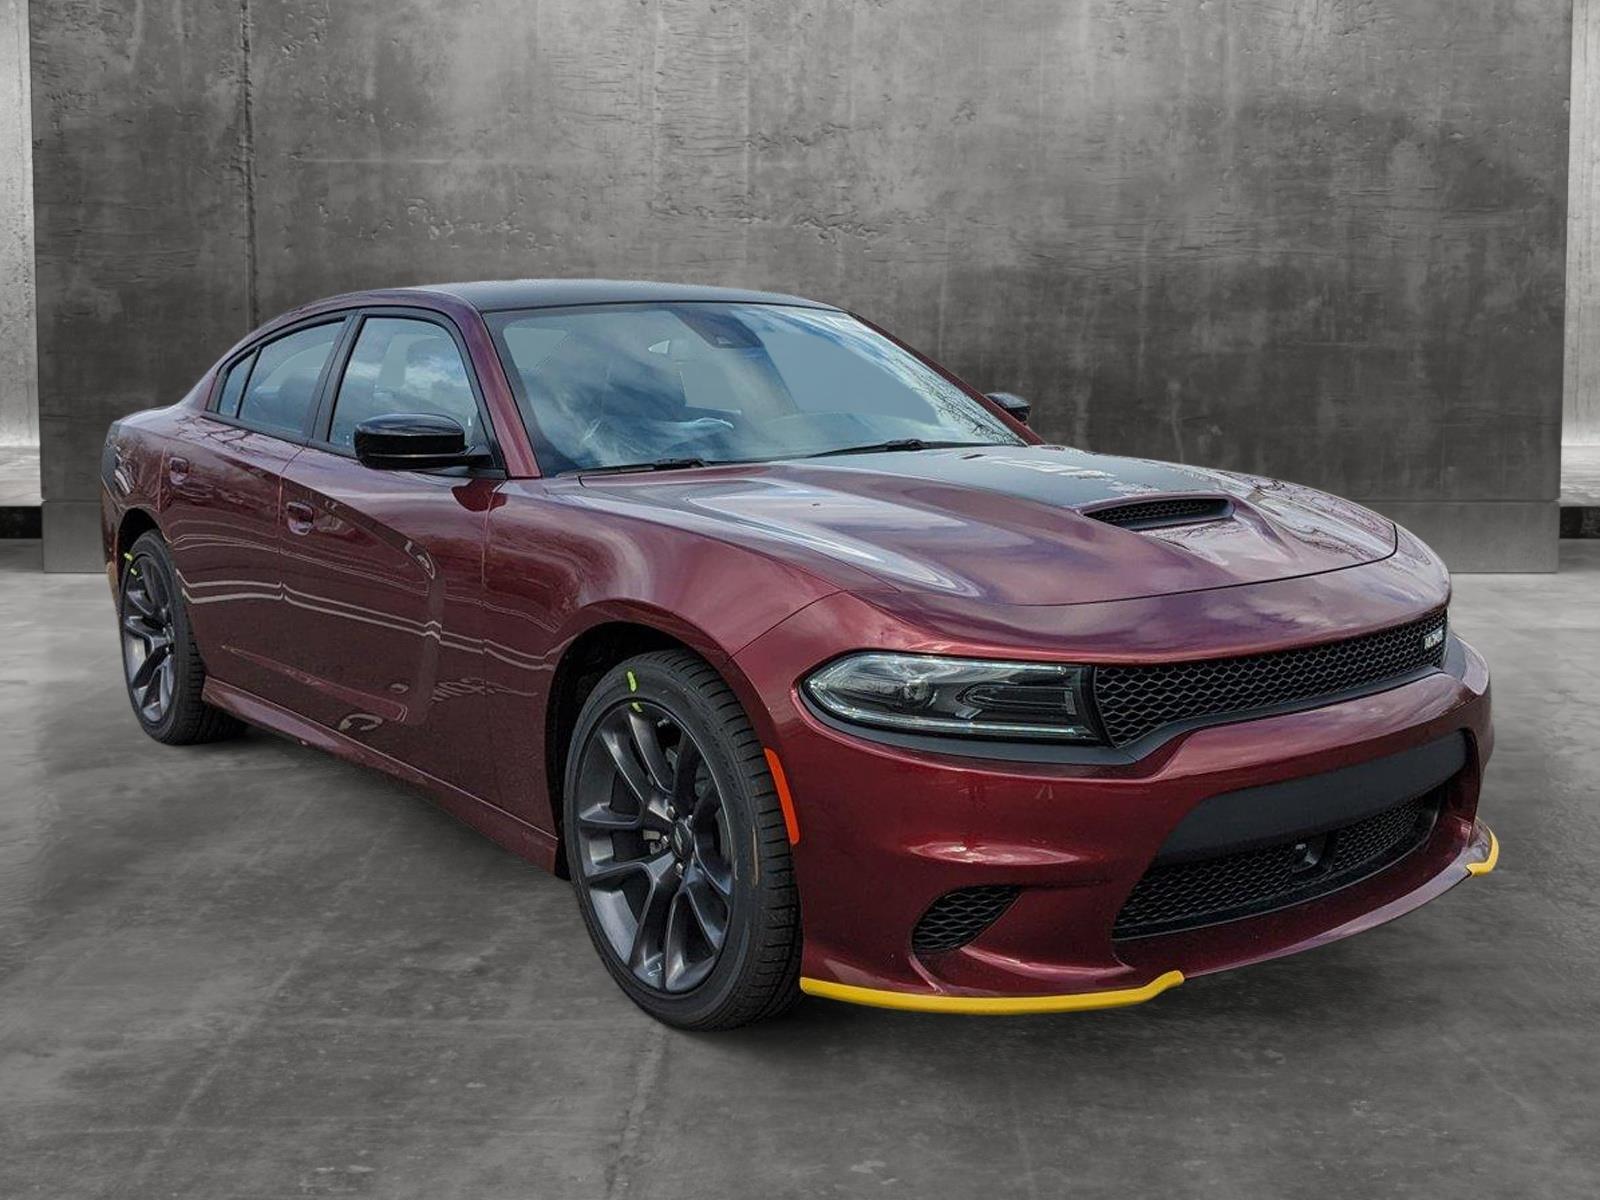 Dodge Charger #6 Hero Image